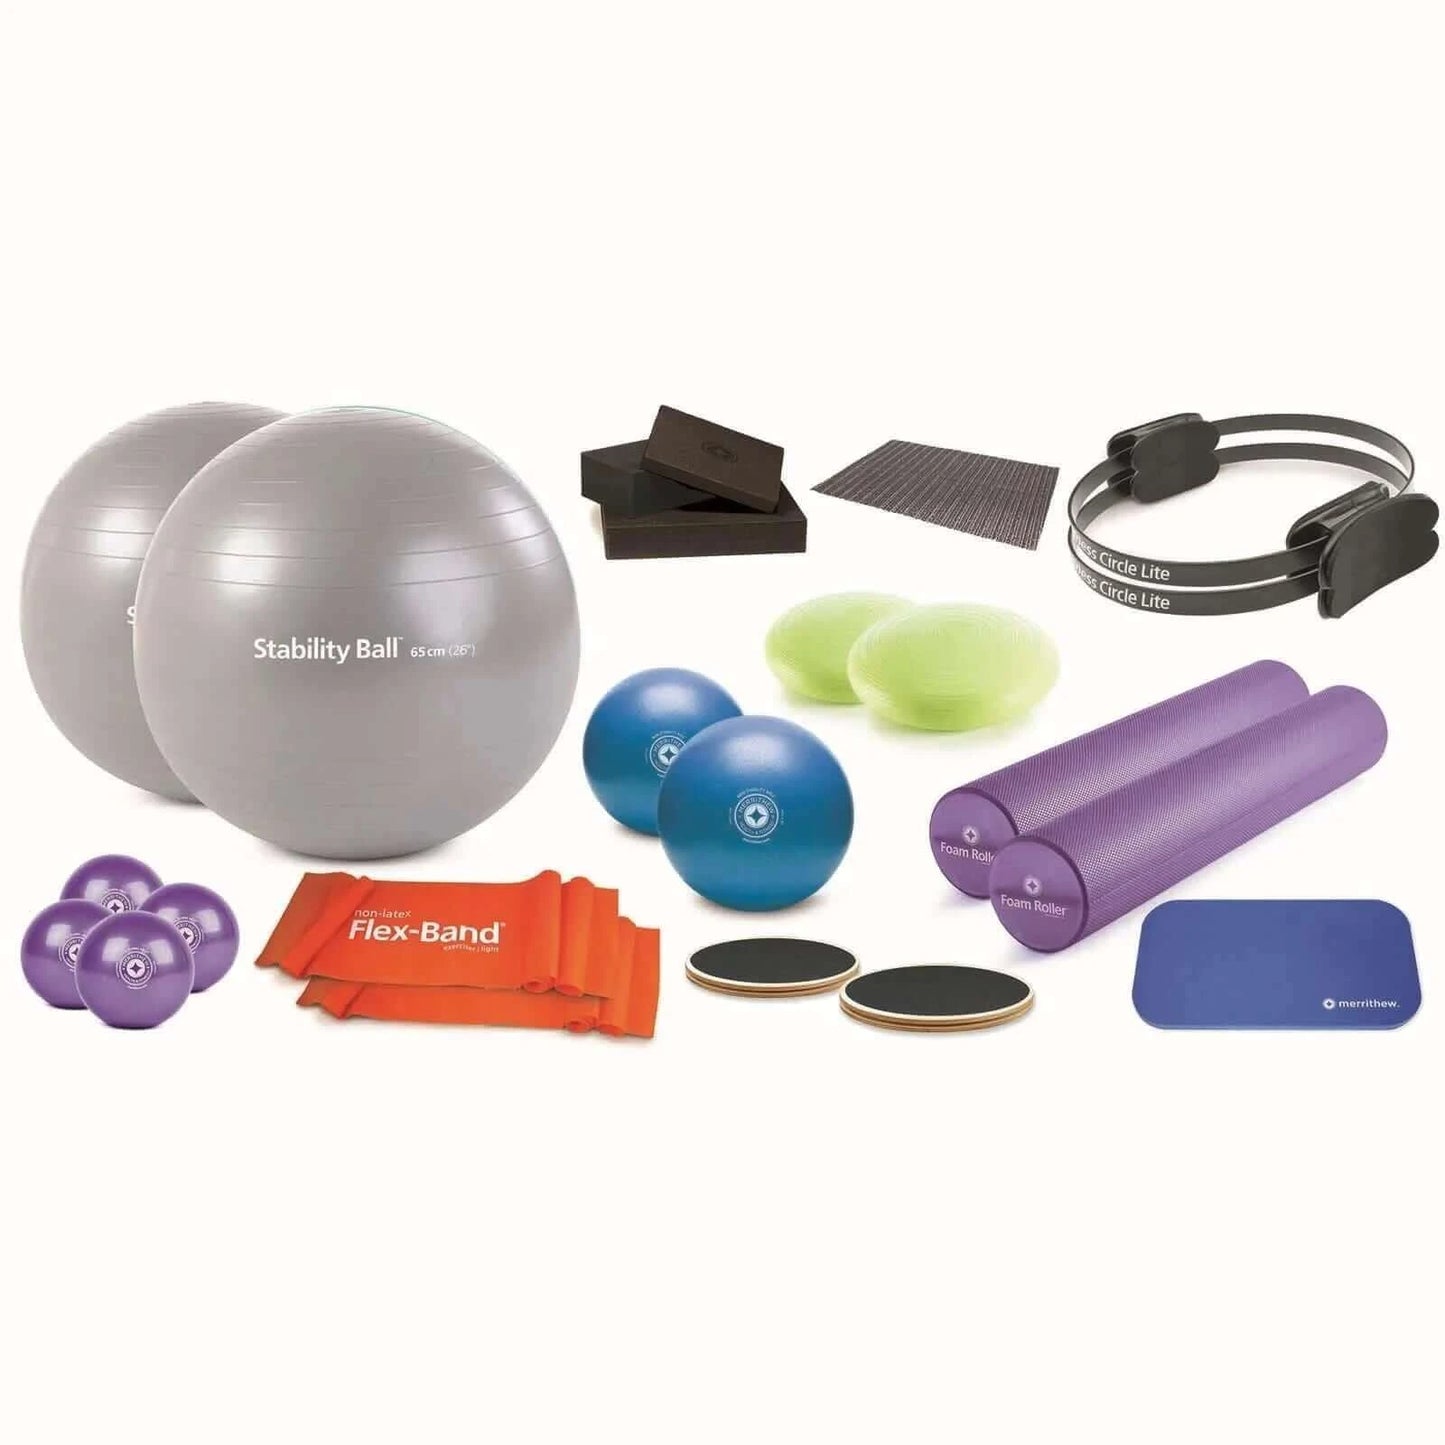  Merrithew™ Pilates Rehab Accessory Bundle by Merrithew™ sold by Pilates Matters® by BSP LLC